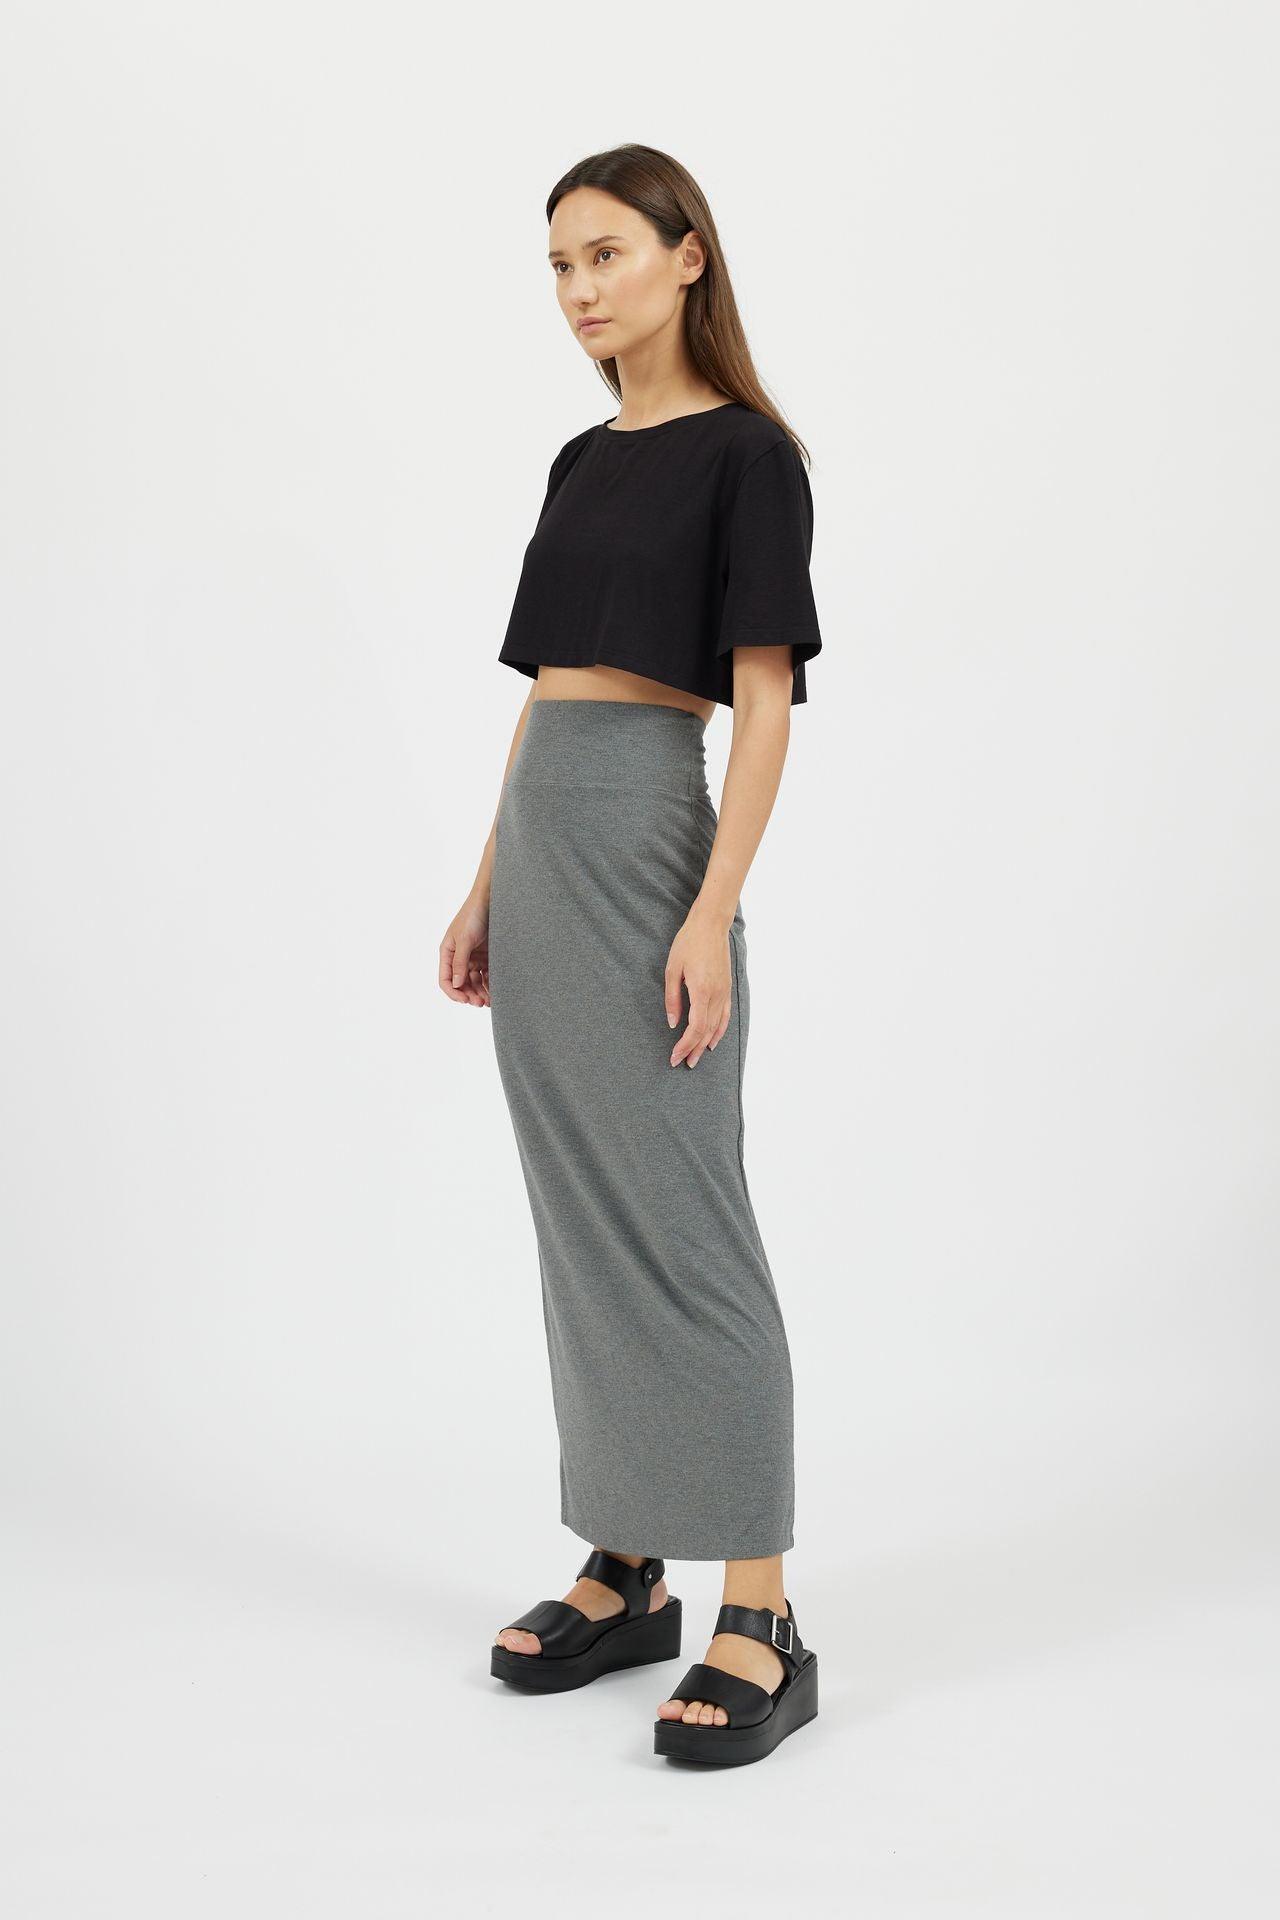 High Waisted Pencil Skirt Skirts Labeled | Not 